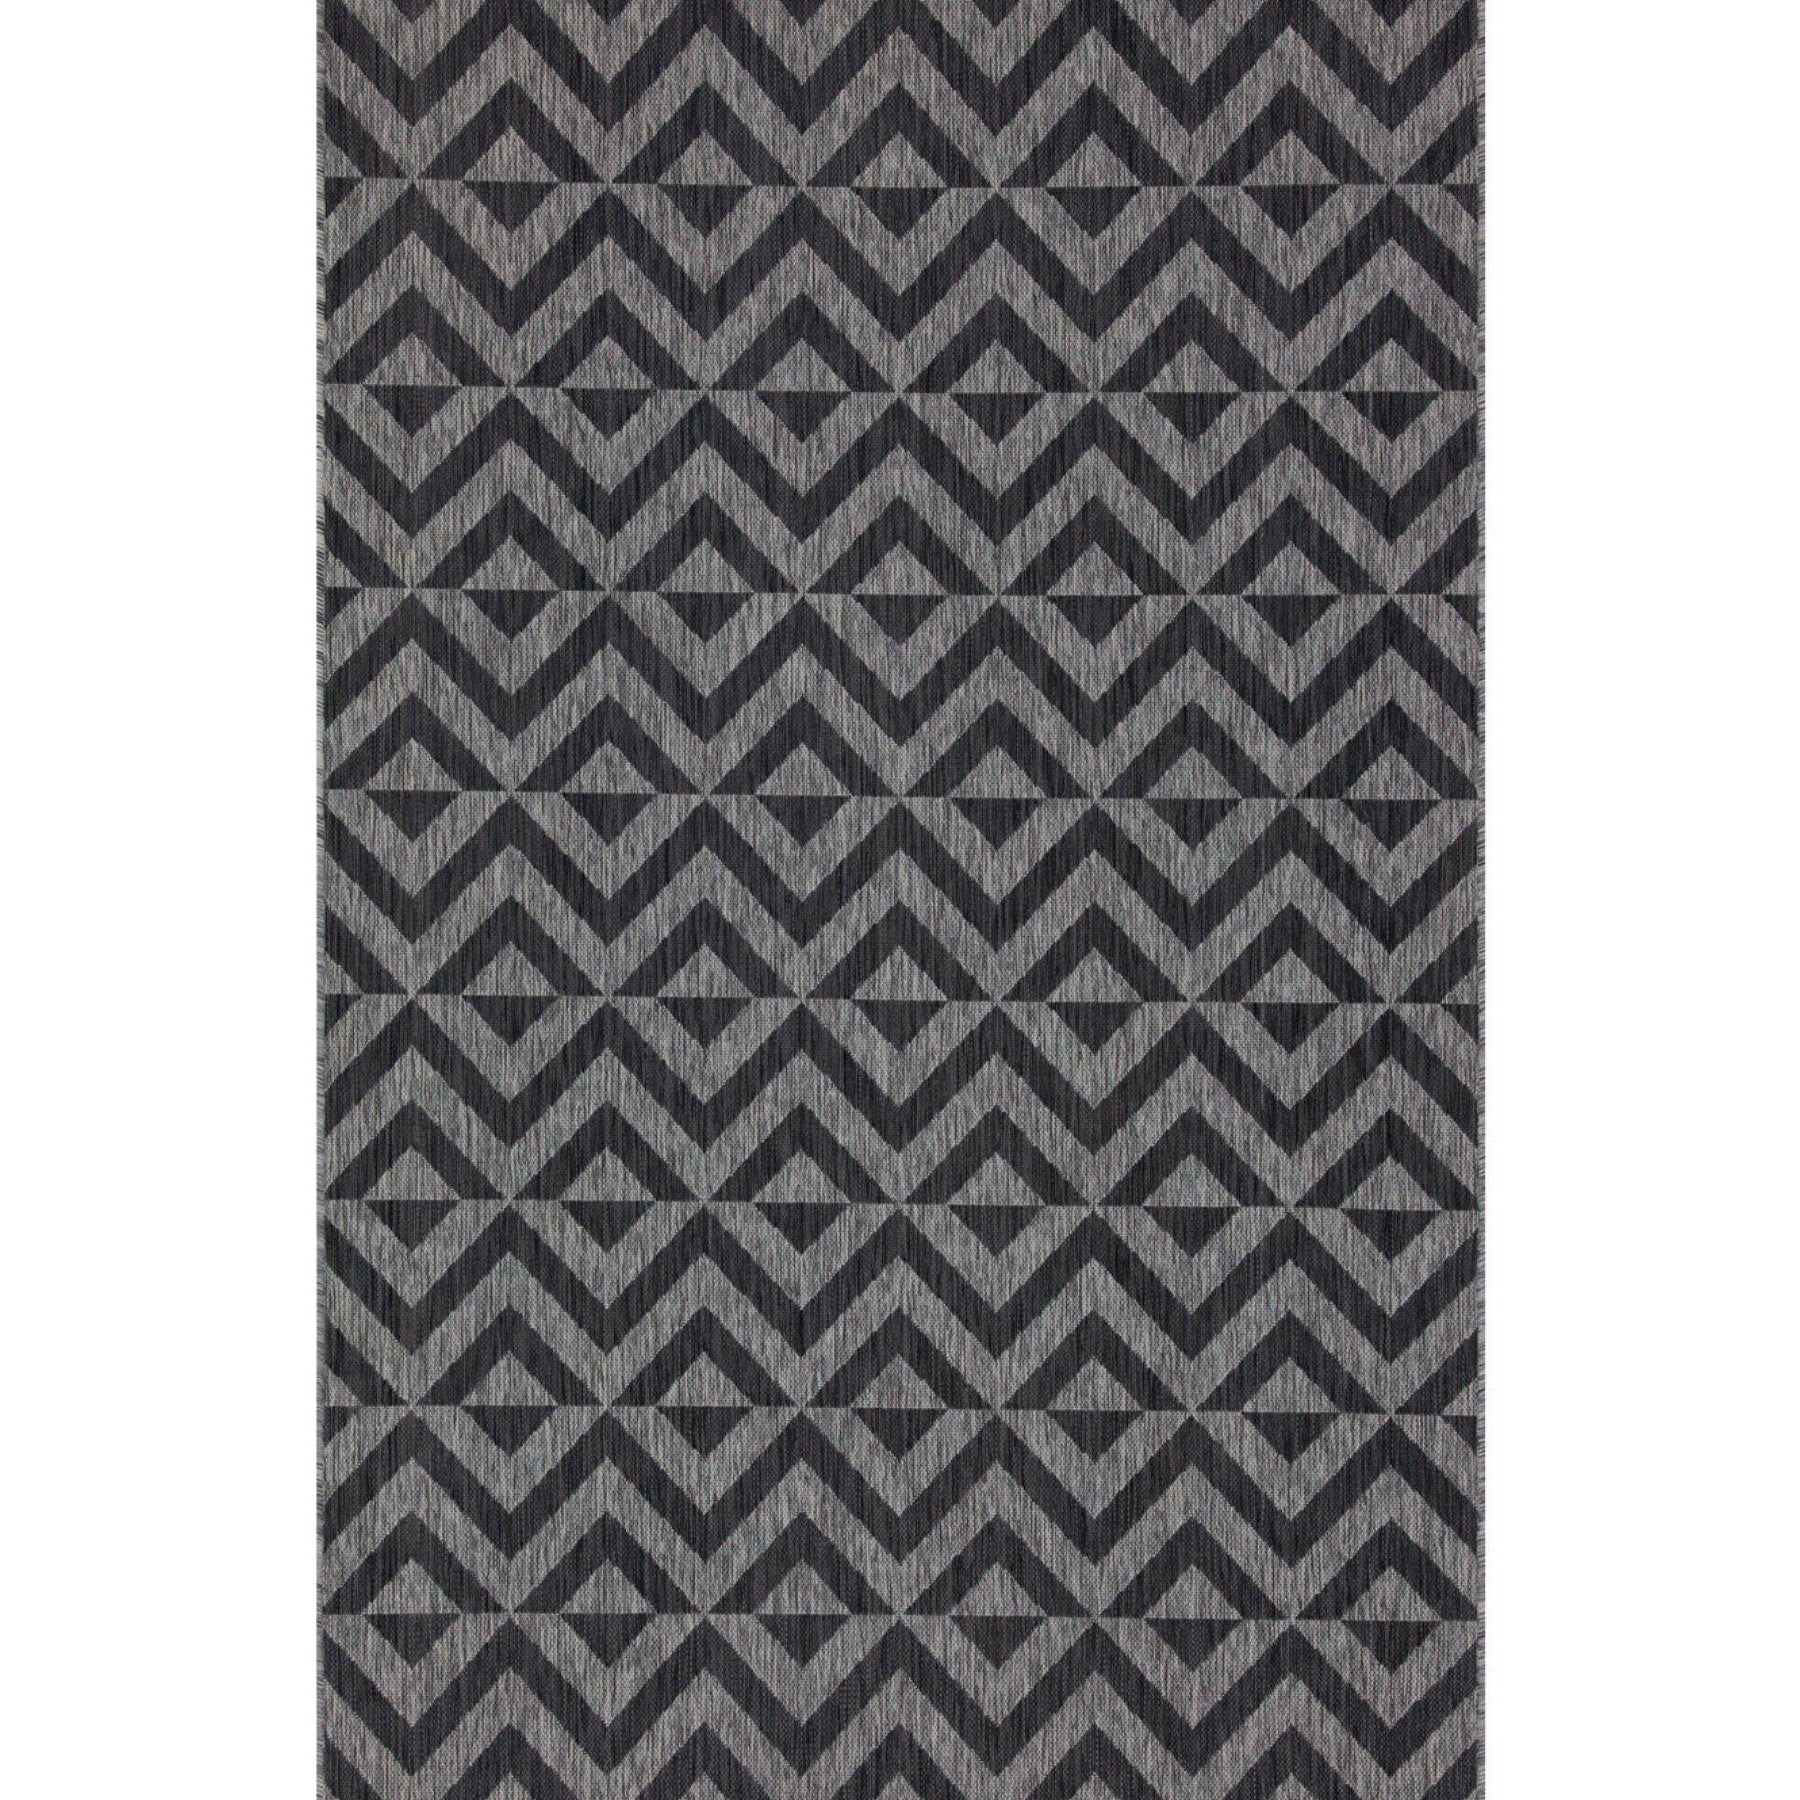 Charcoal Grey Geometric Outdoor, Garden and Patio Area Rug - image 1